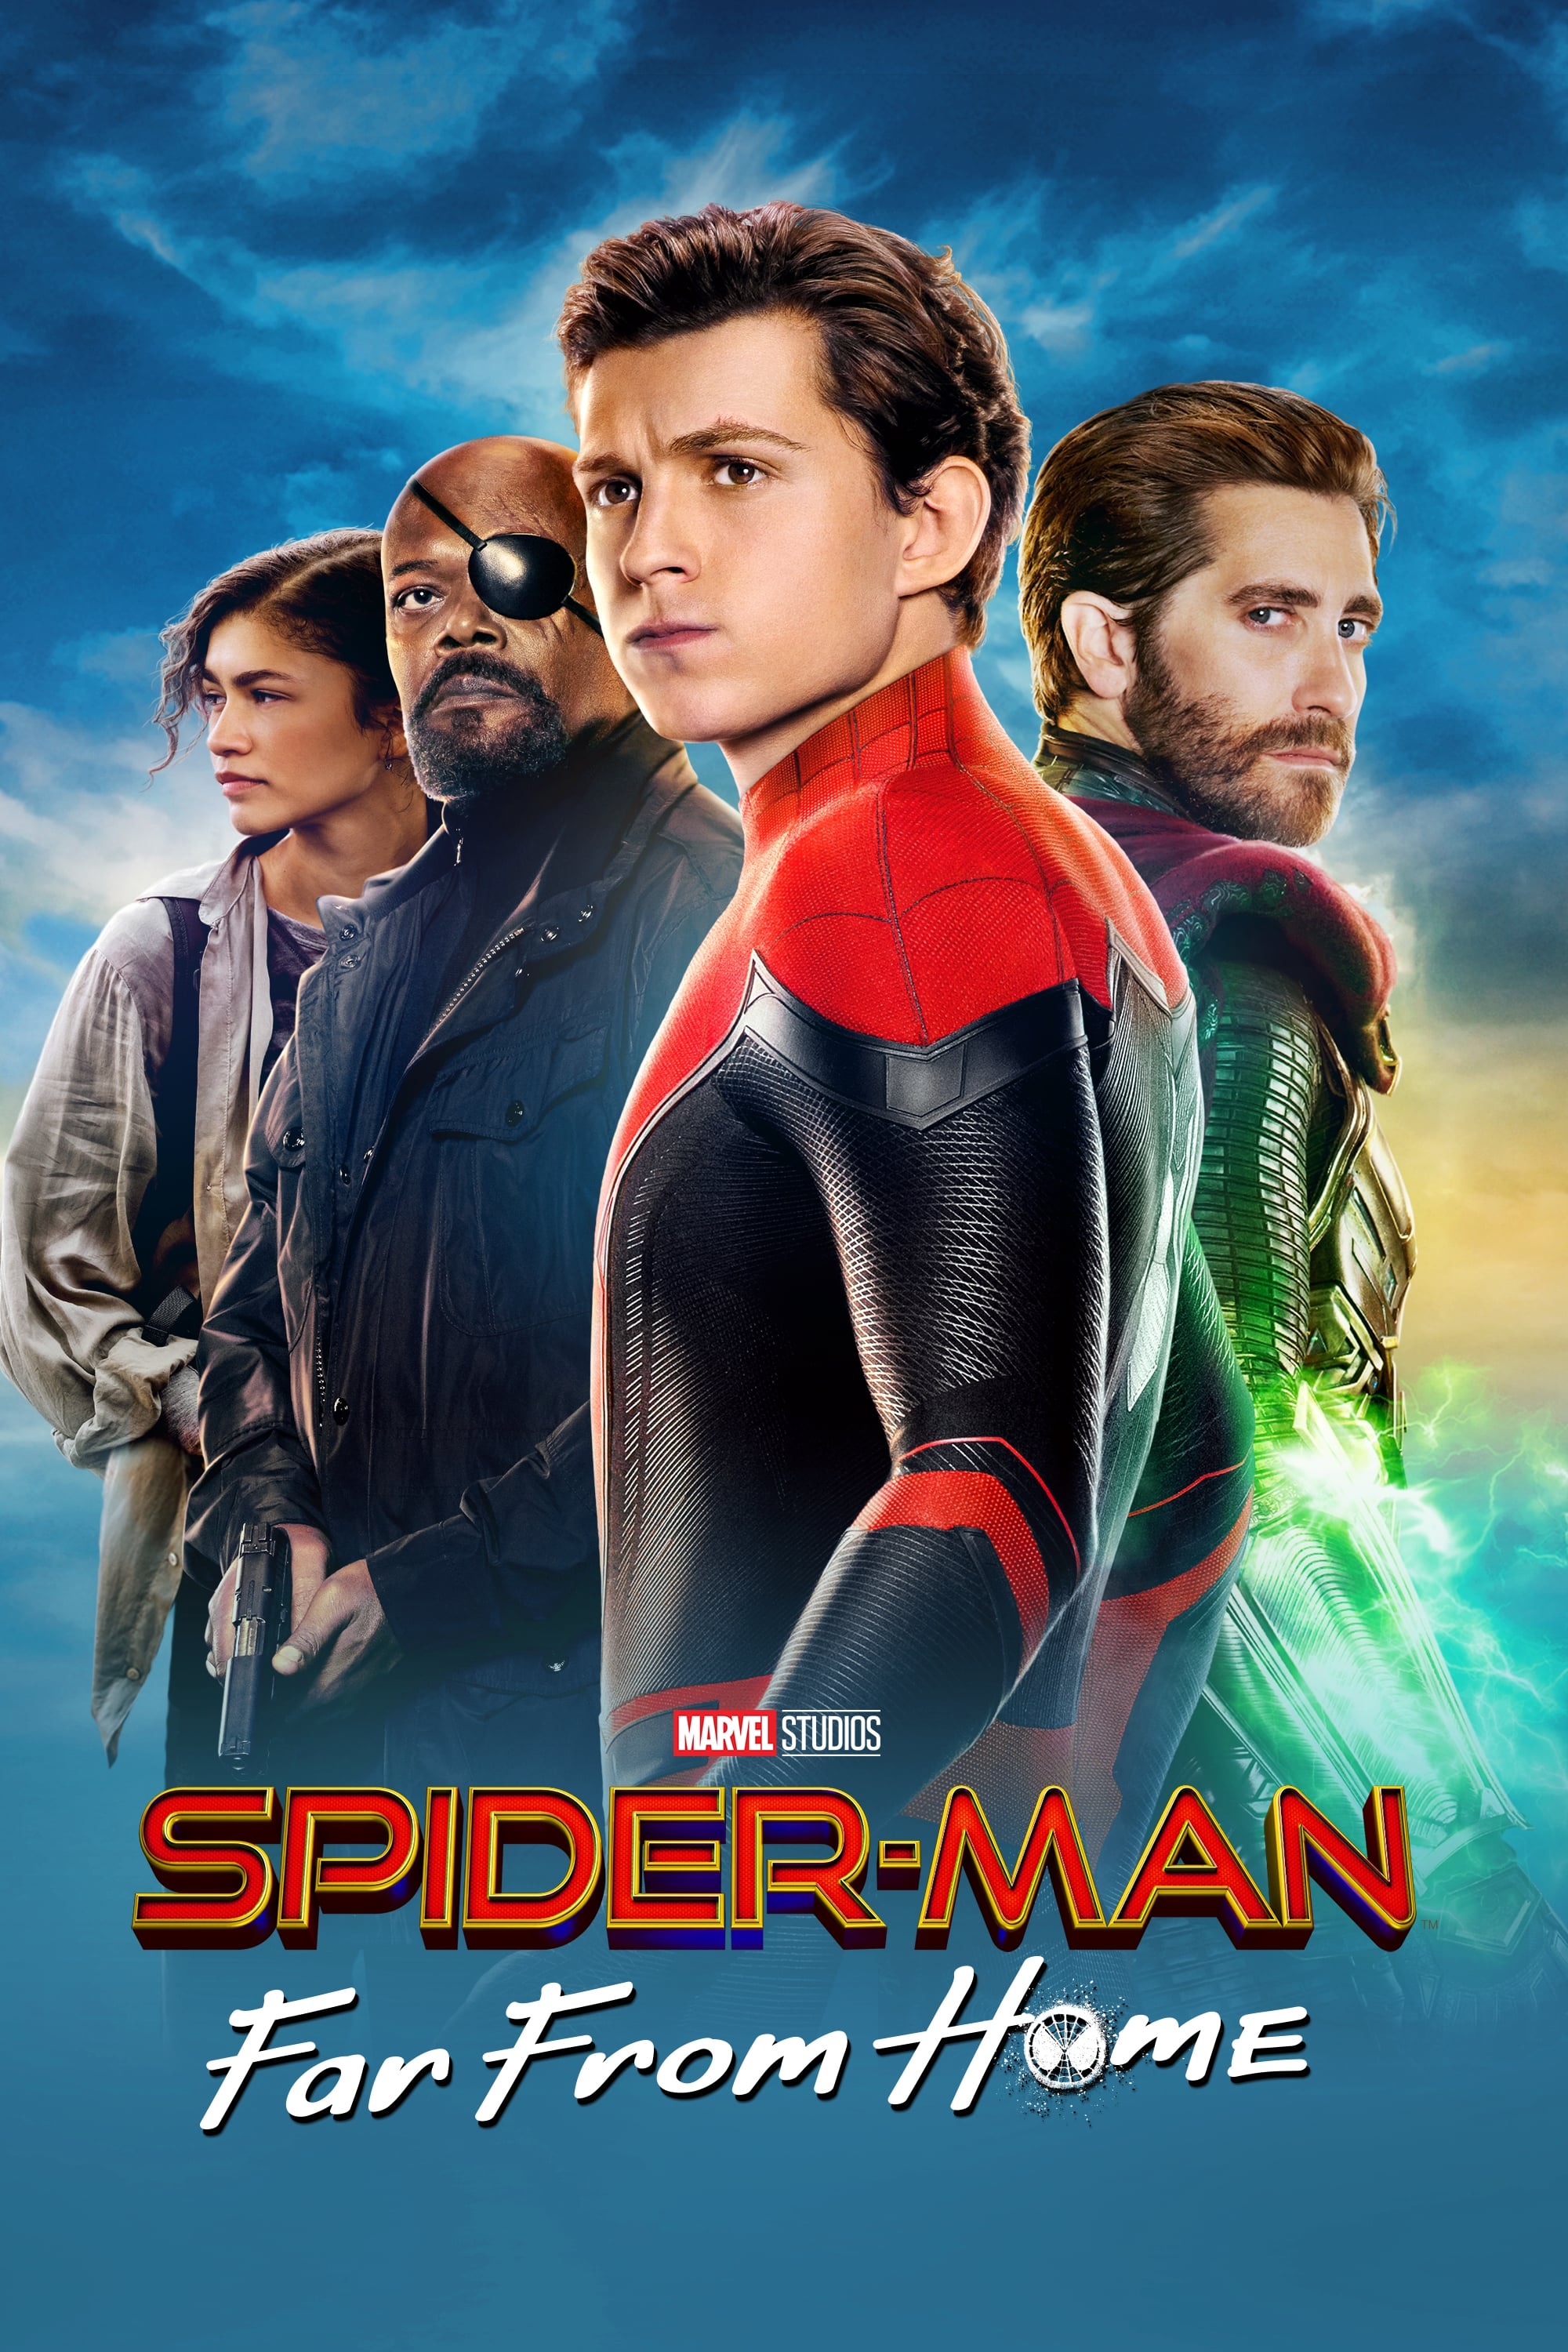 spiderman far from home movie review